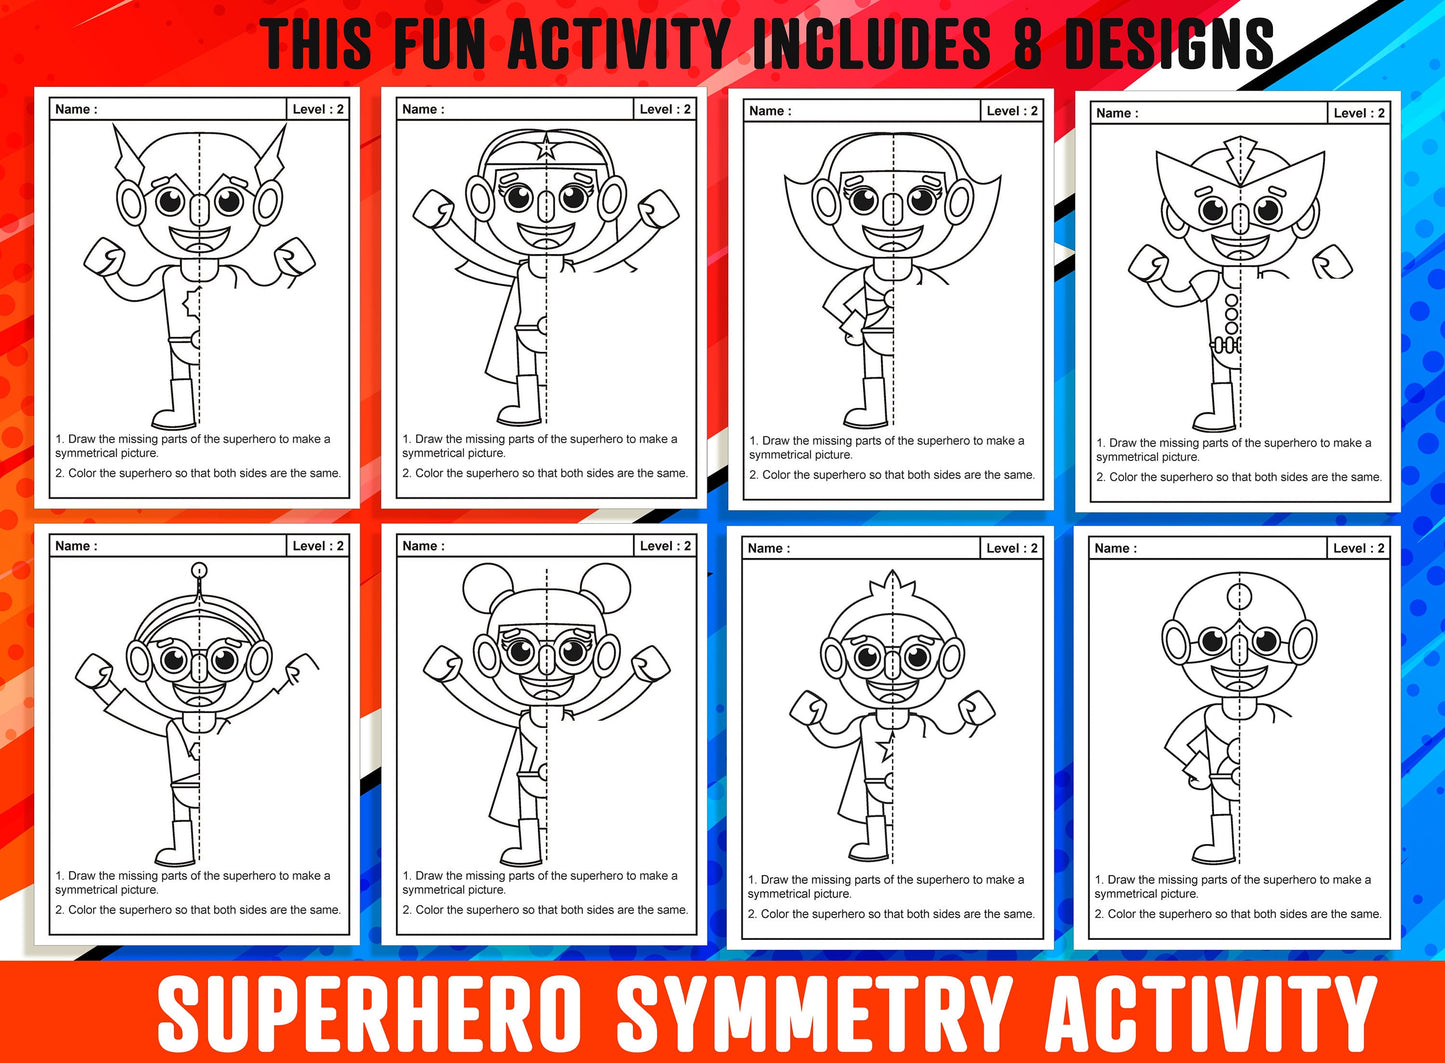 Superhero Symmetry Worksheet, Superhero Theme Lines of Symmetry Activity, 24 Pages, Includes 8 Designs, Each With 3 Levels of Difficulty